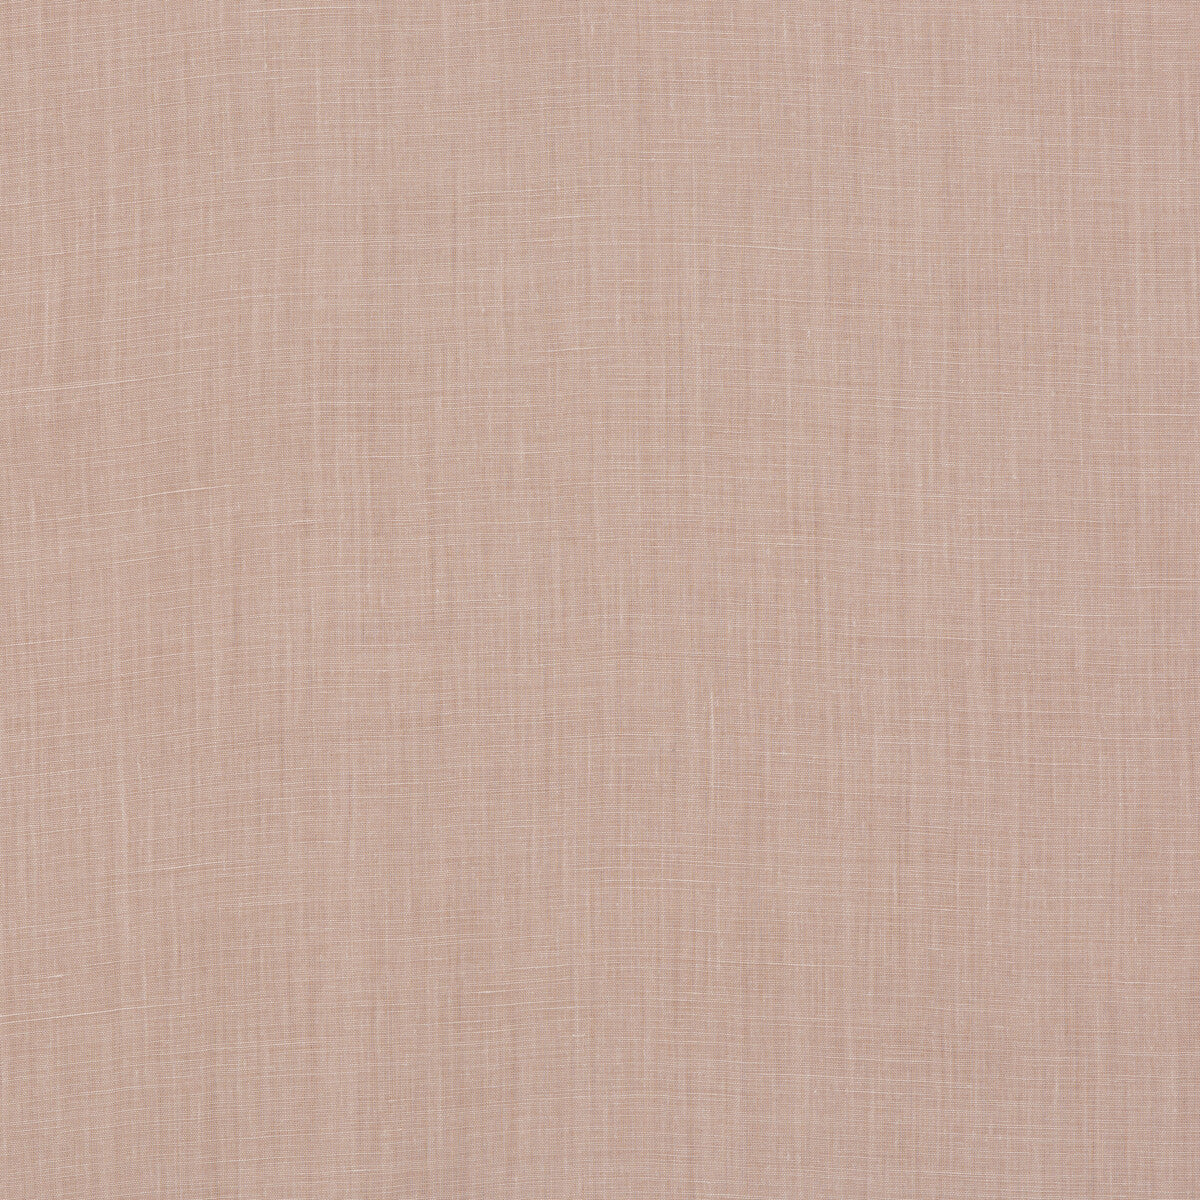 Baker House Linen fabric in blush color - pattern BF10961.440.0 - by G P &amp; J Baker in the Baker House Linens collection